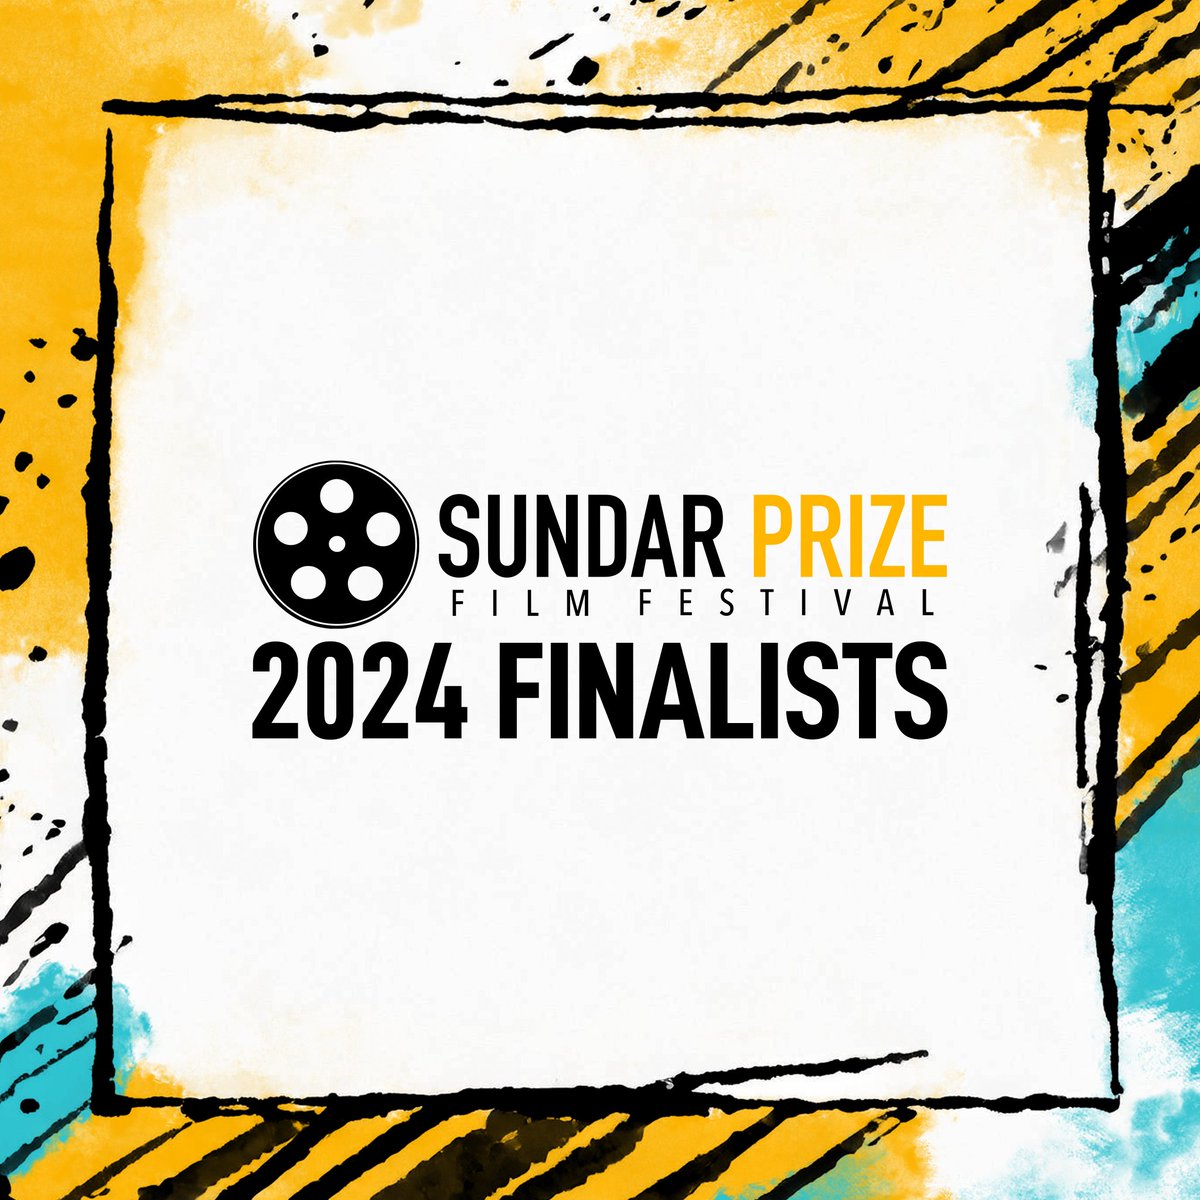 We are thrilled to unveil the highly anticipated list of finalists for its 2024 inaugural edition, showcasing outstanding talent from around the world. One winner will be selected for a prize in each of the nine categories listed. 🏆 #sundarprize #sundarprizefilmfestival